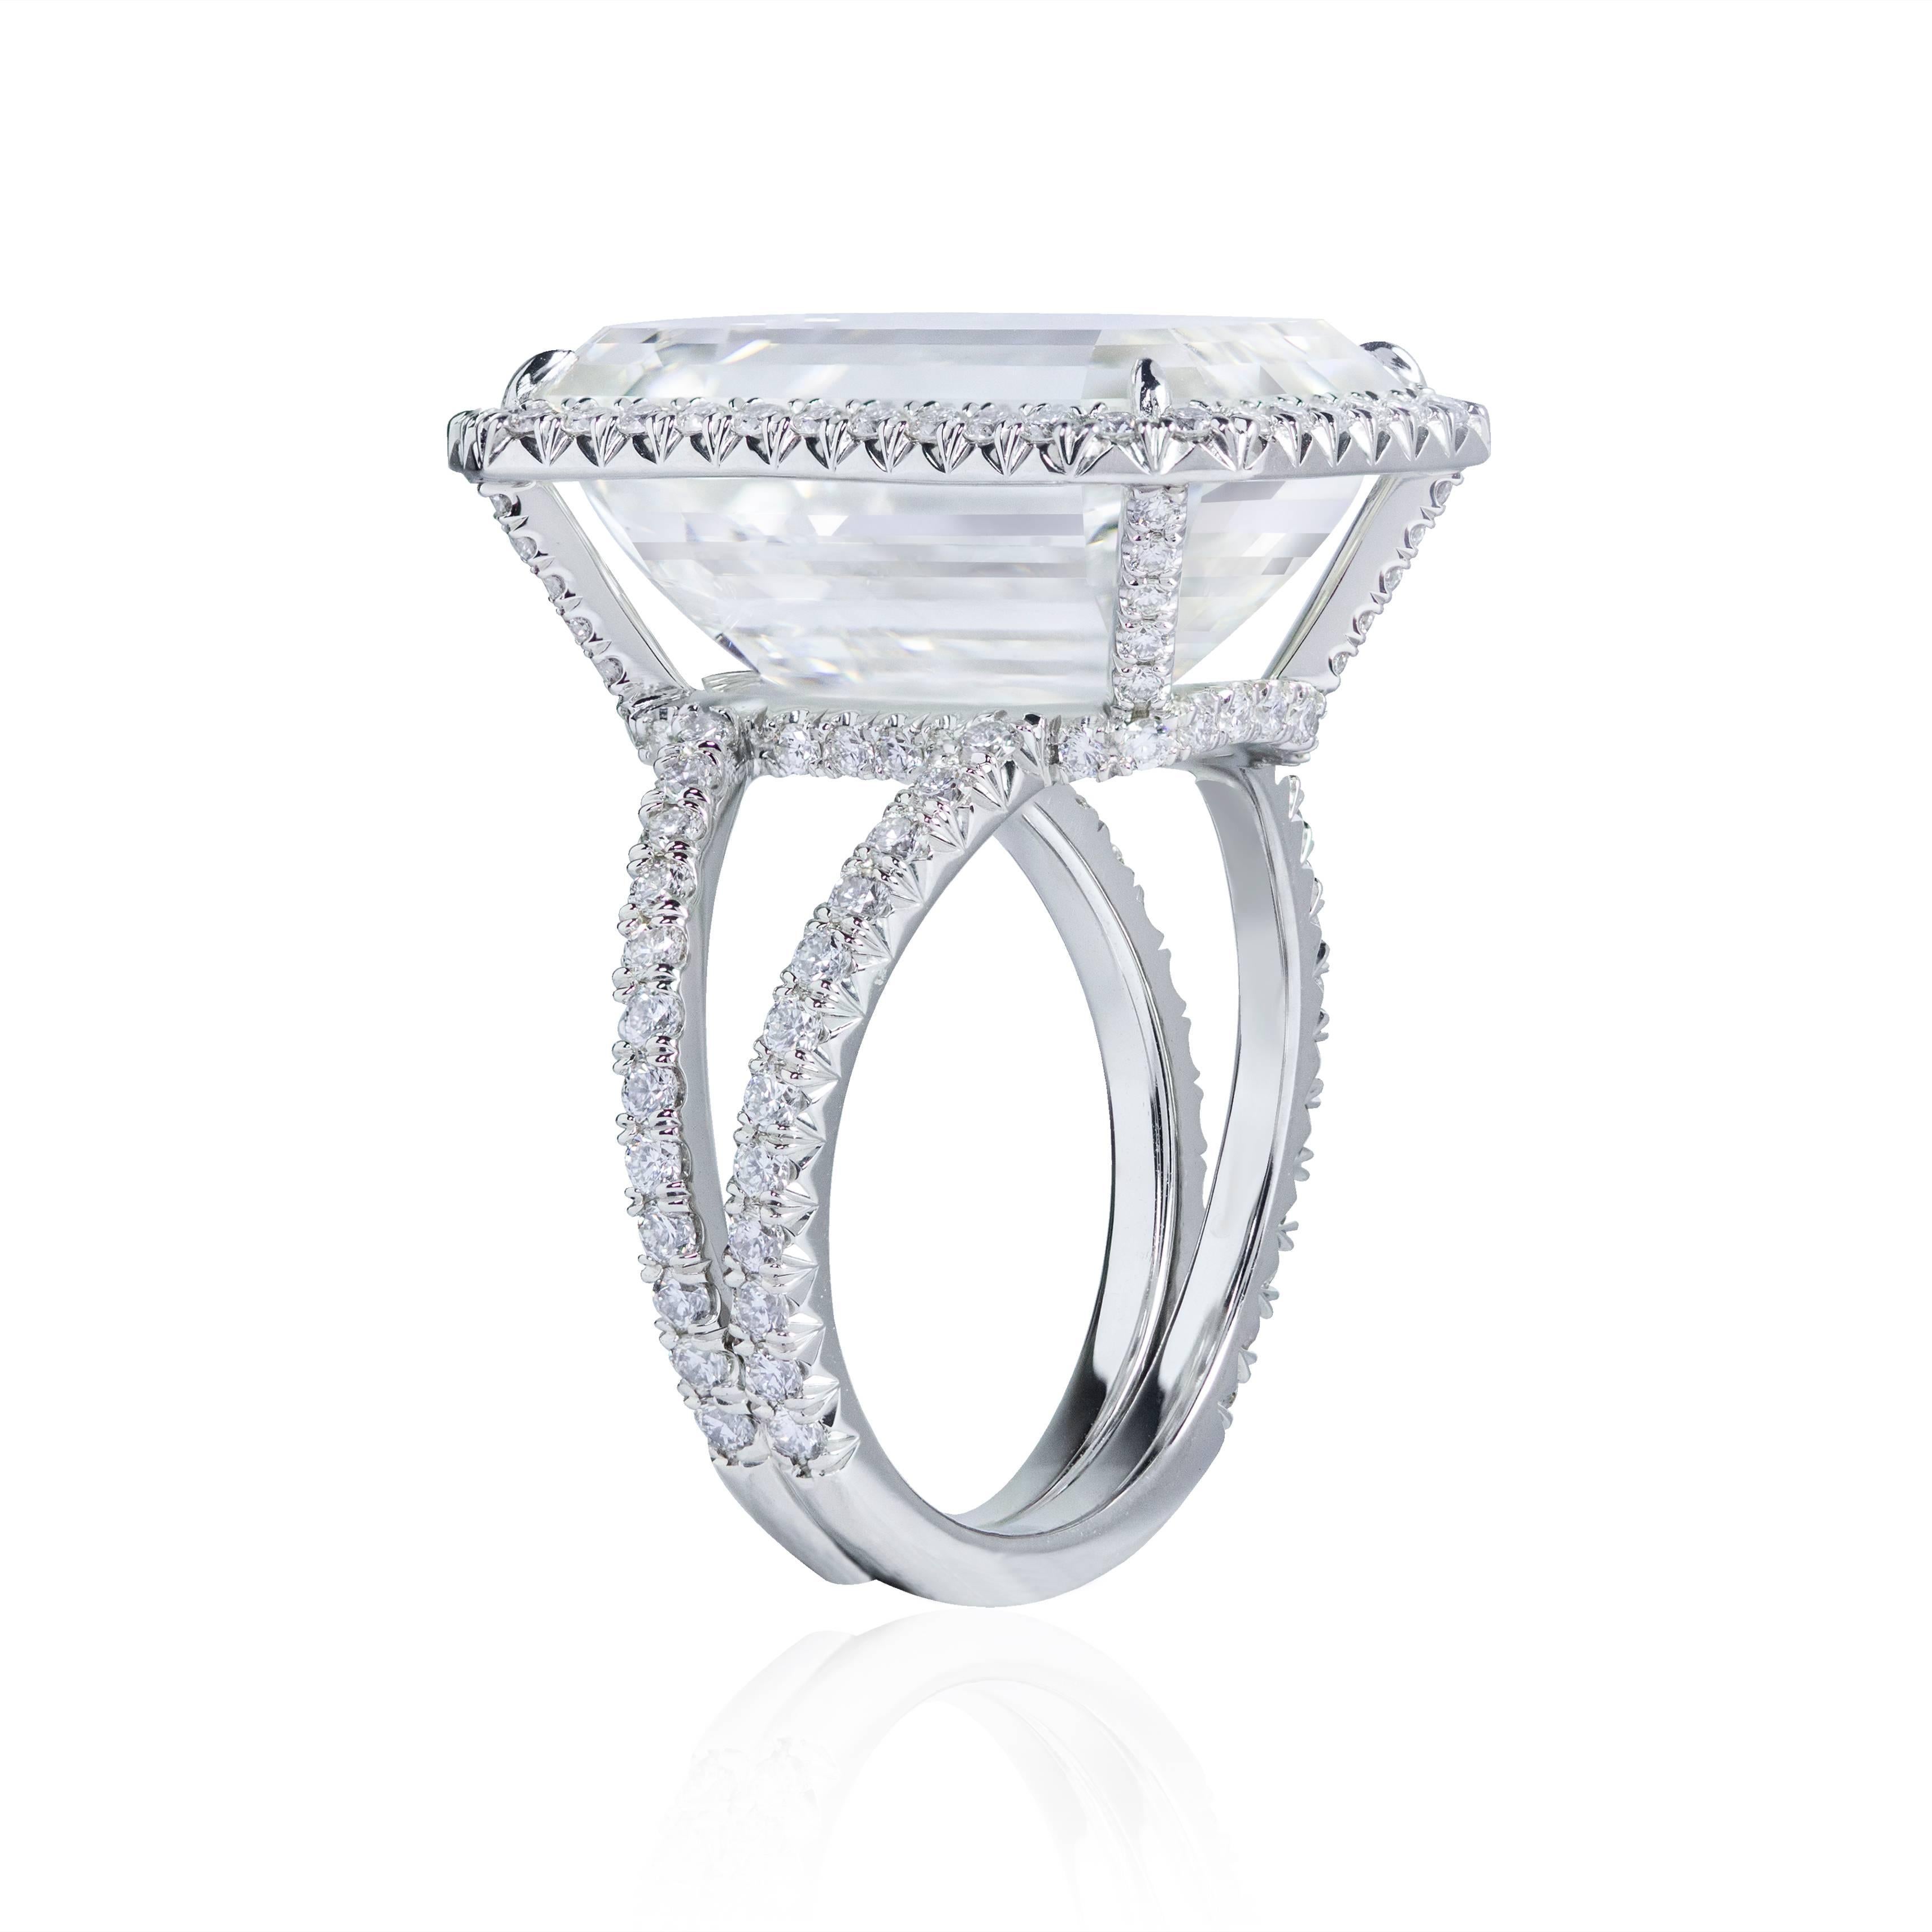 This important and elegant ring features a 15 carats emerald cut diamond center stone that GIA certified as K color and VS2 in clarity. Surrounded by a single row of round brilliant diamonds and set in a split shank setting accented by round melee